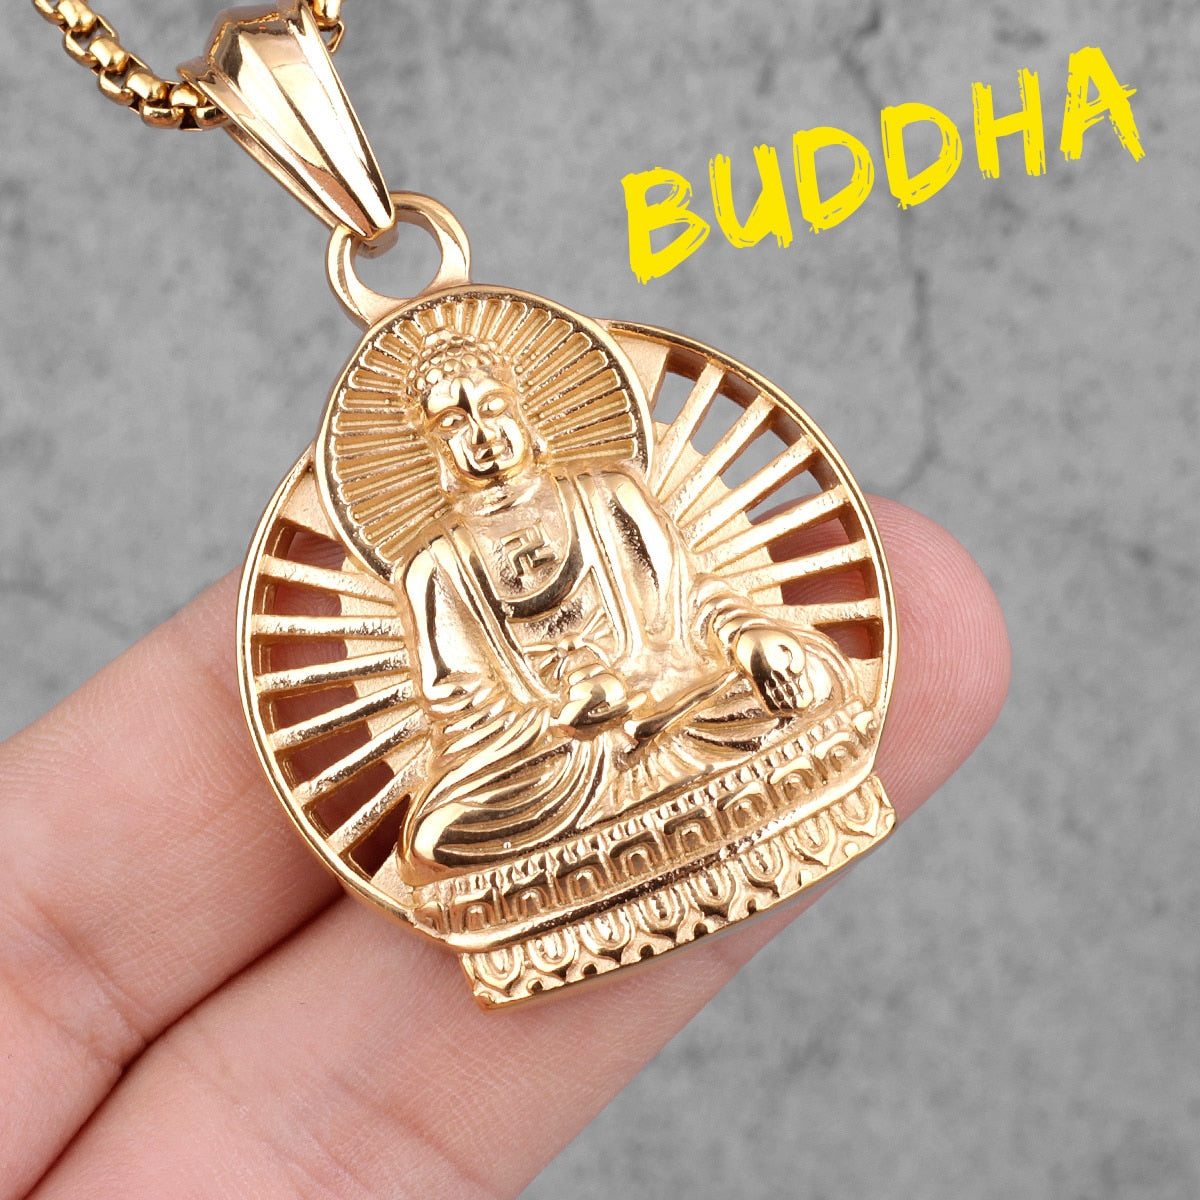 Buddhism Buddha Gold Silver Color Sainless Steel Men Necklace Pendant Chain for Boyfriend Male Jewelry Creativity Gift Wholesale - Charlie Dolly